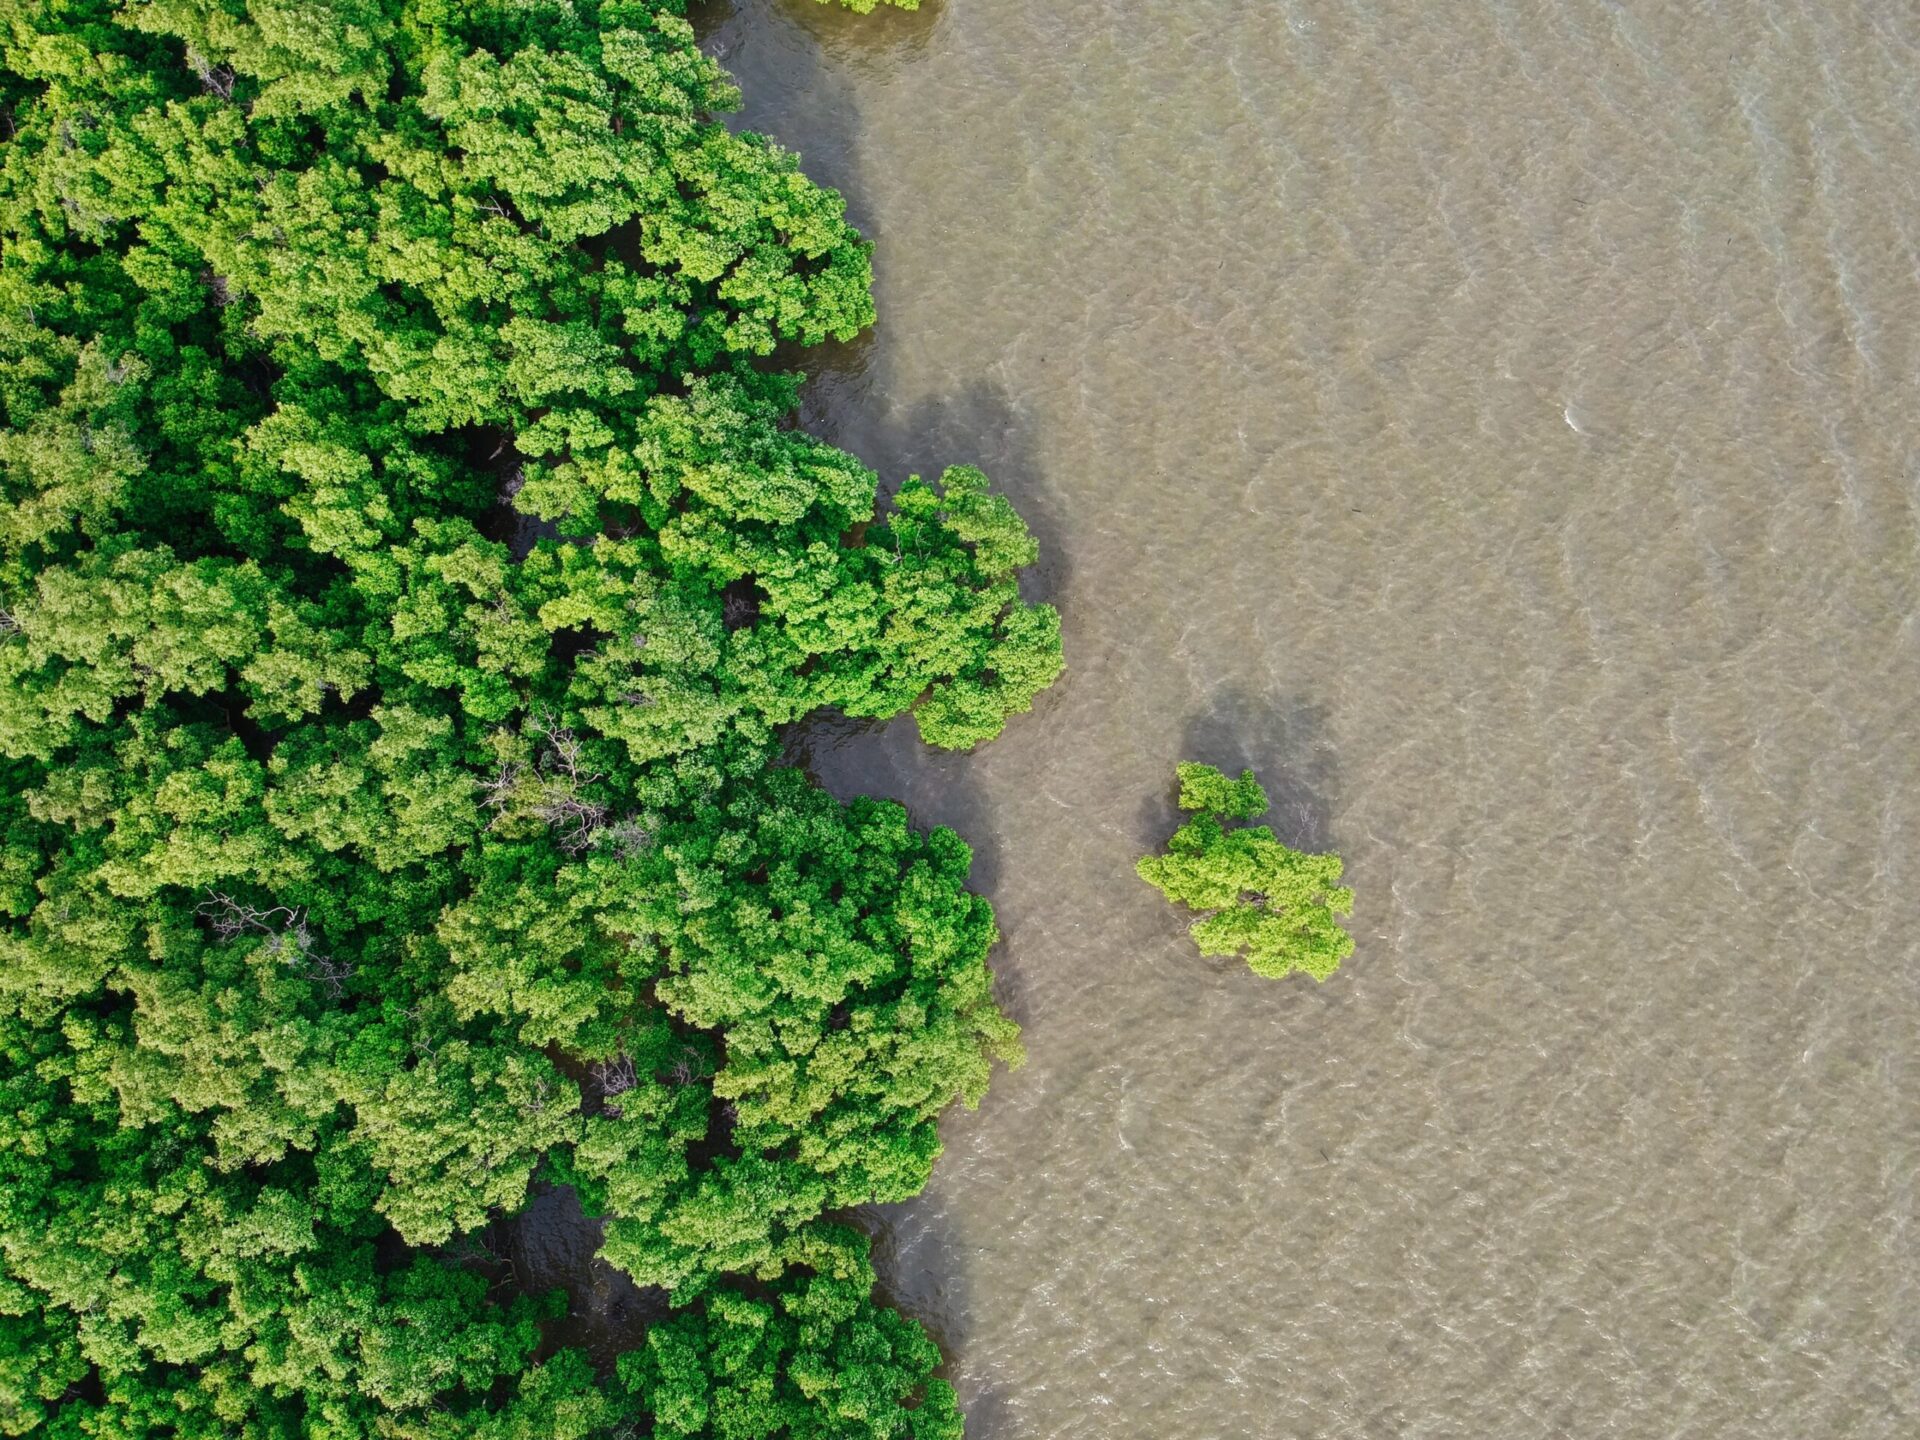 a view of a stand of mangroves on the coast from above